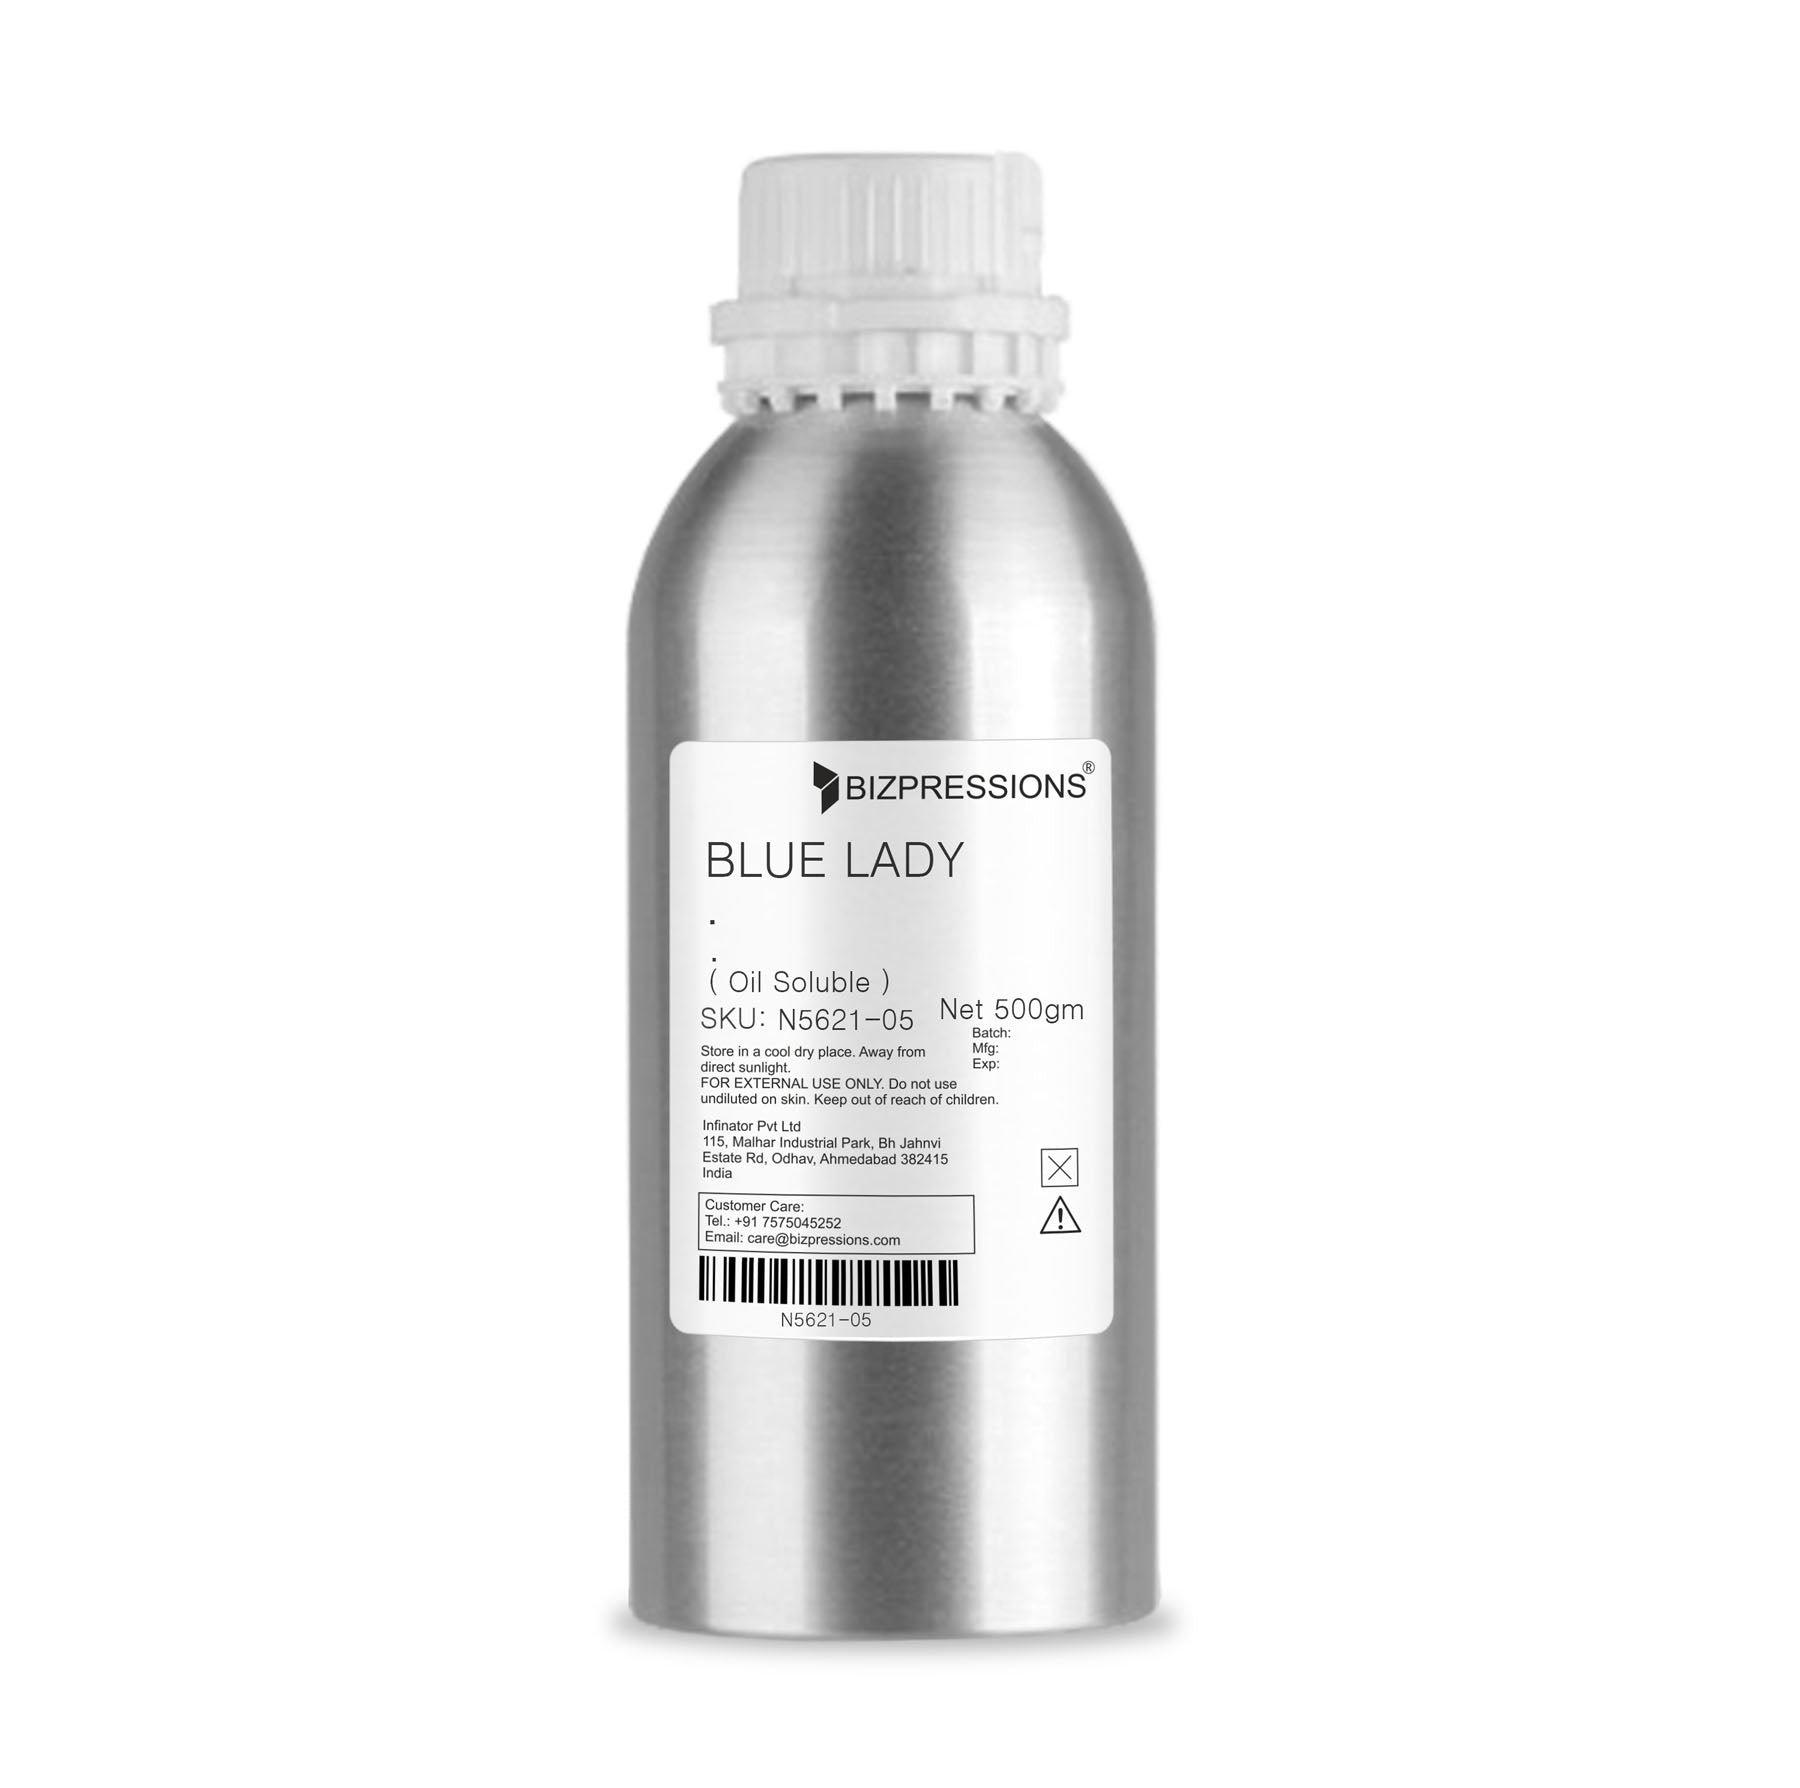 BLUE LADY - Fragrance ( Oil Soluble ) - 500 gm